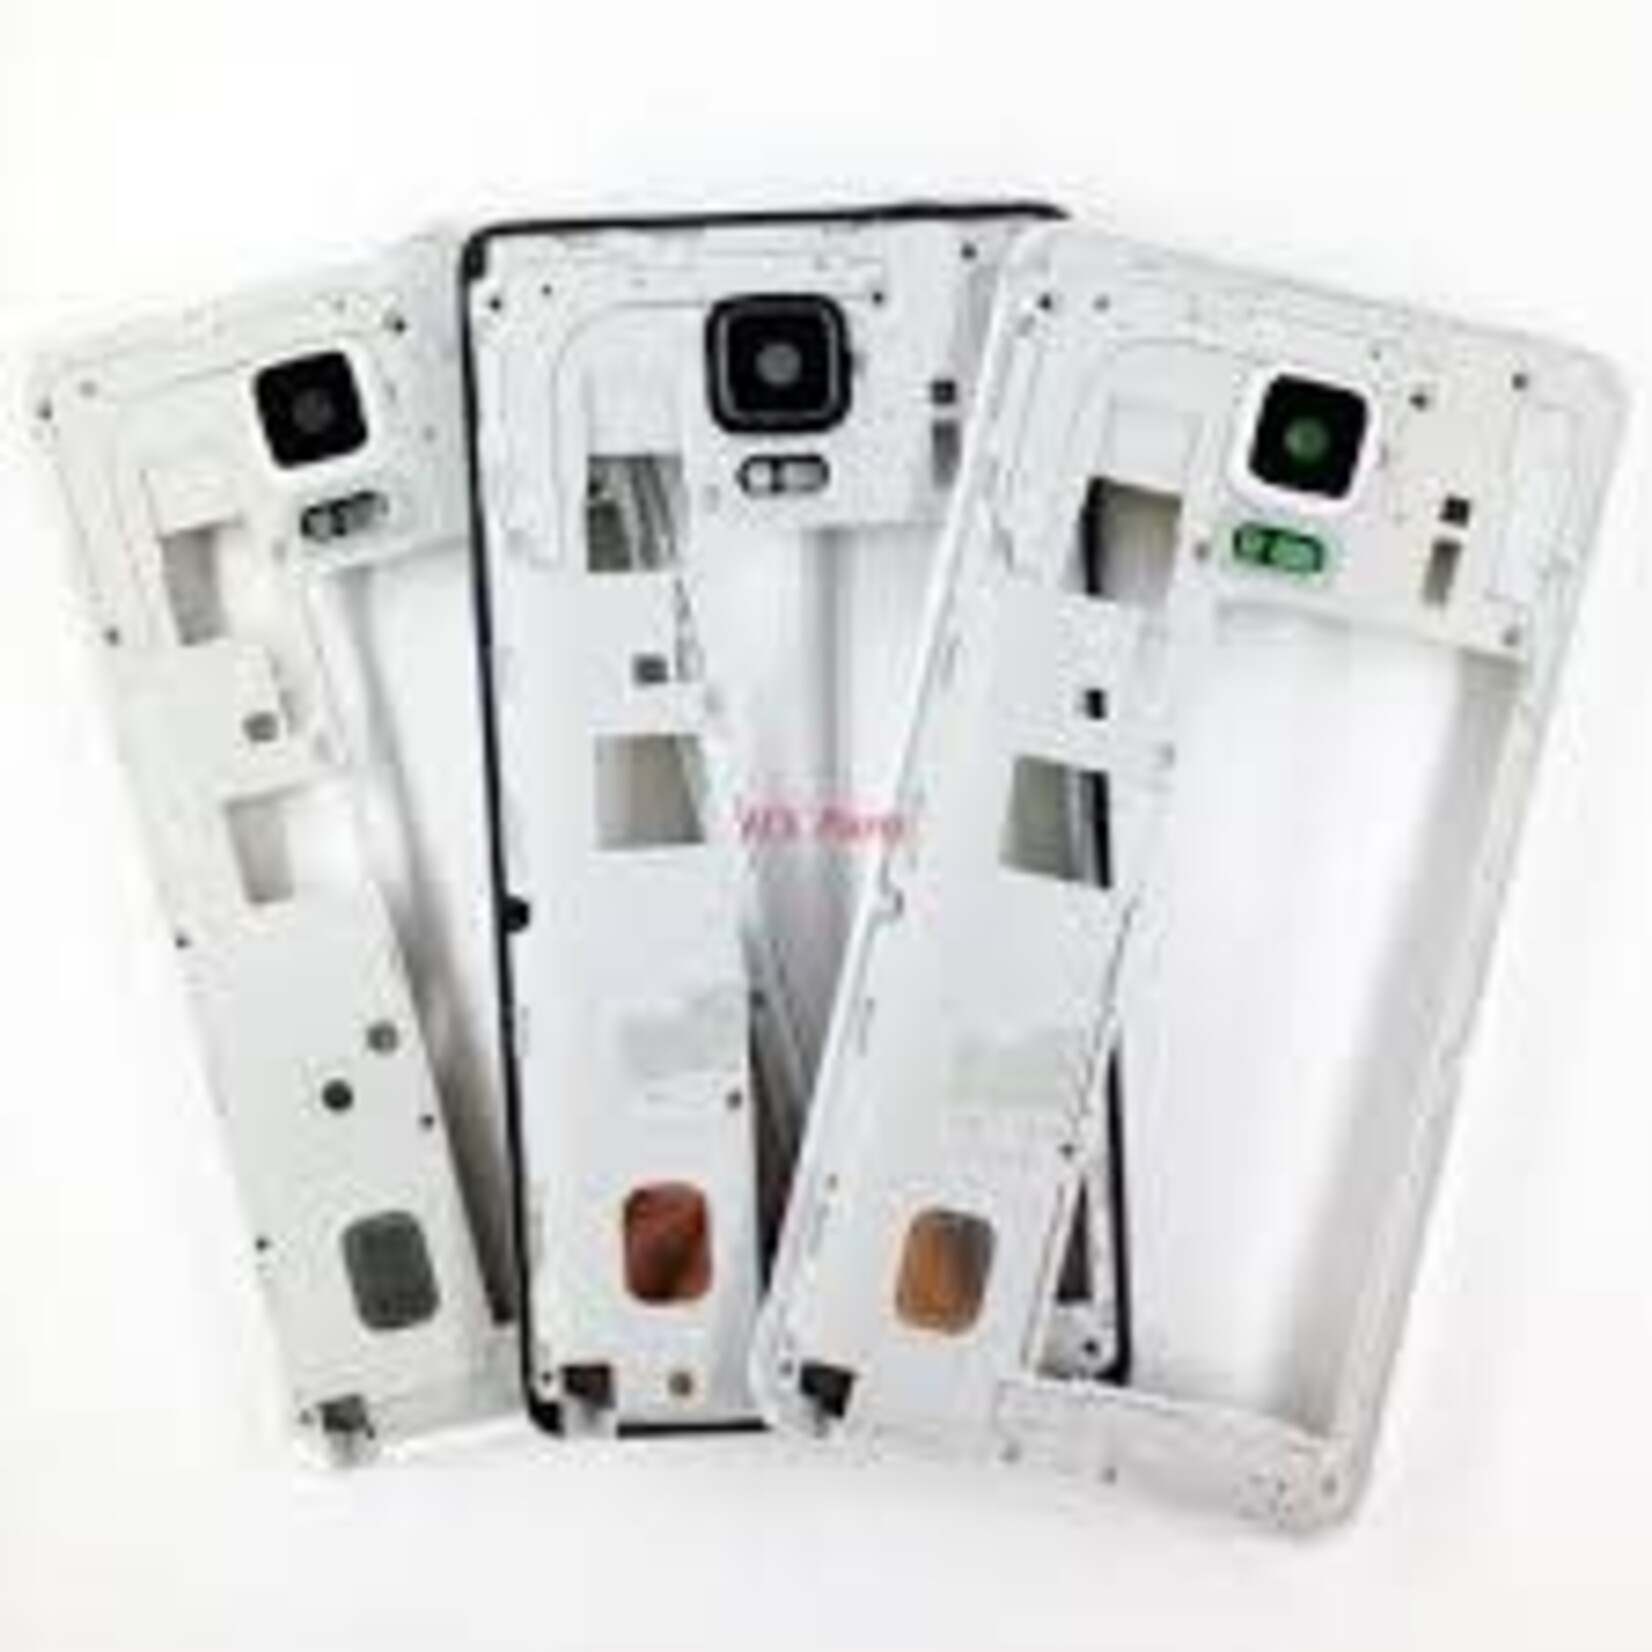 Samsung MID FRAME HOUSING FOR SAMSUNG GALAXY NOTE 4